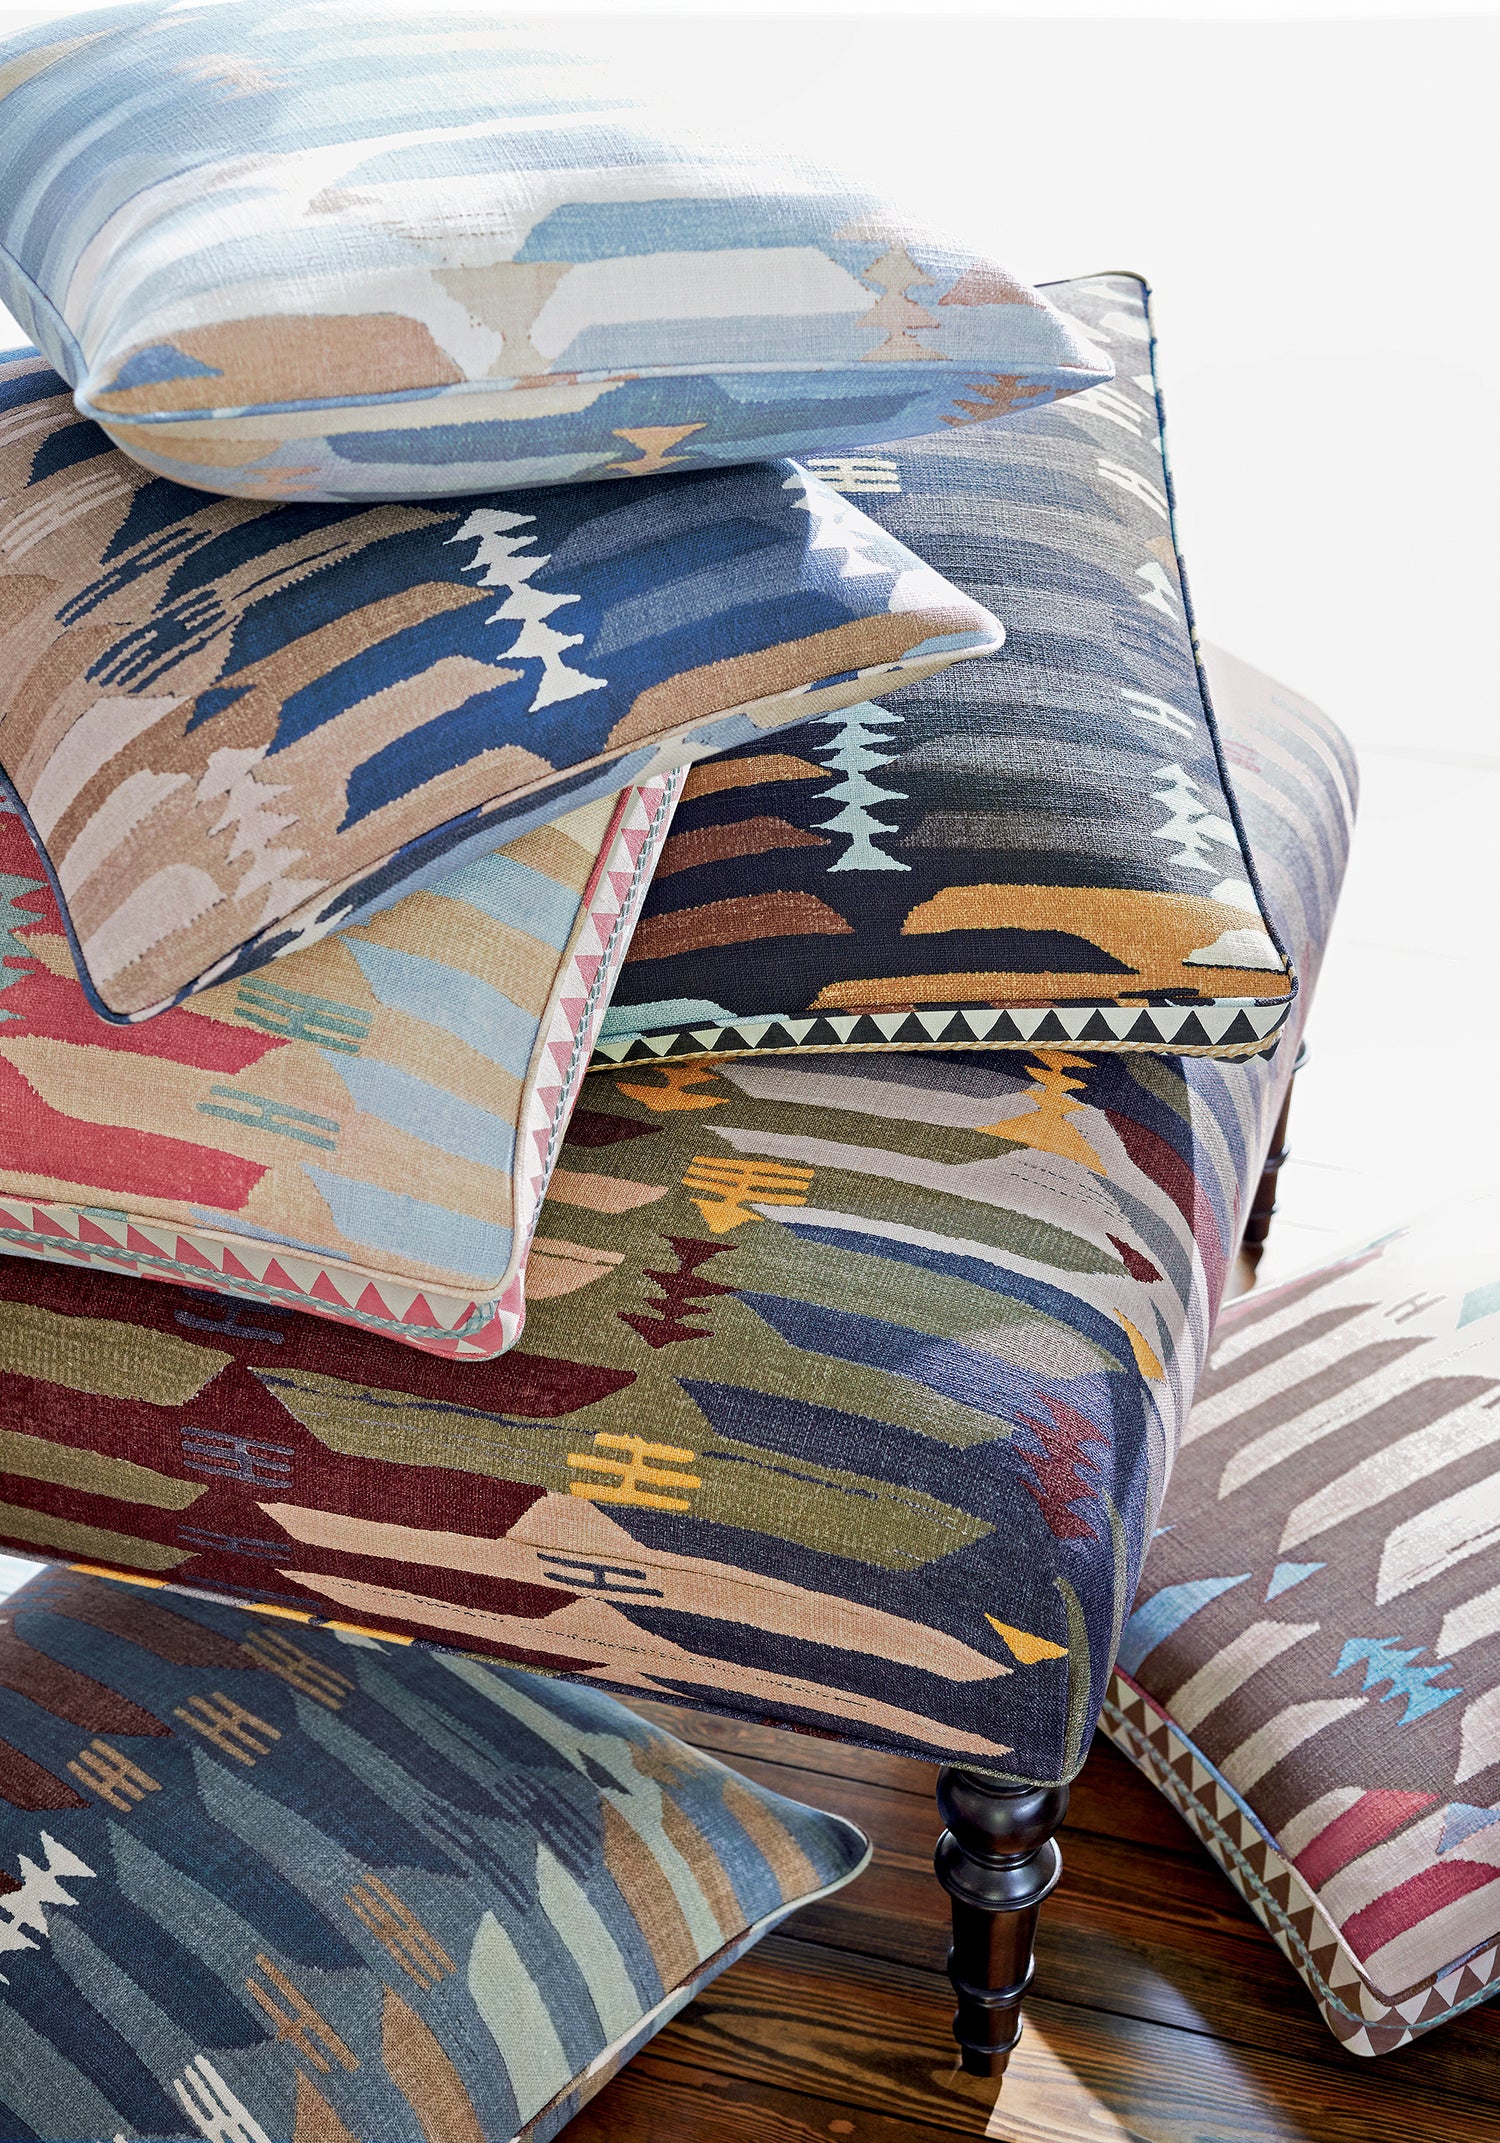 Baxter Ottoman and collection of Rio Grande printed fabric pillows featuring blue and beige color fabric - pattern number F913211 - by Thibaut in the Mesa collection